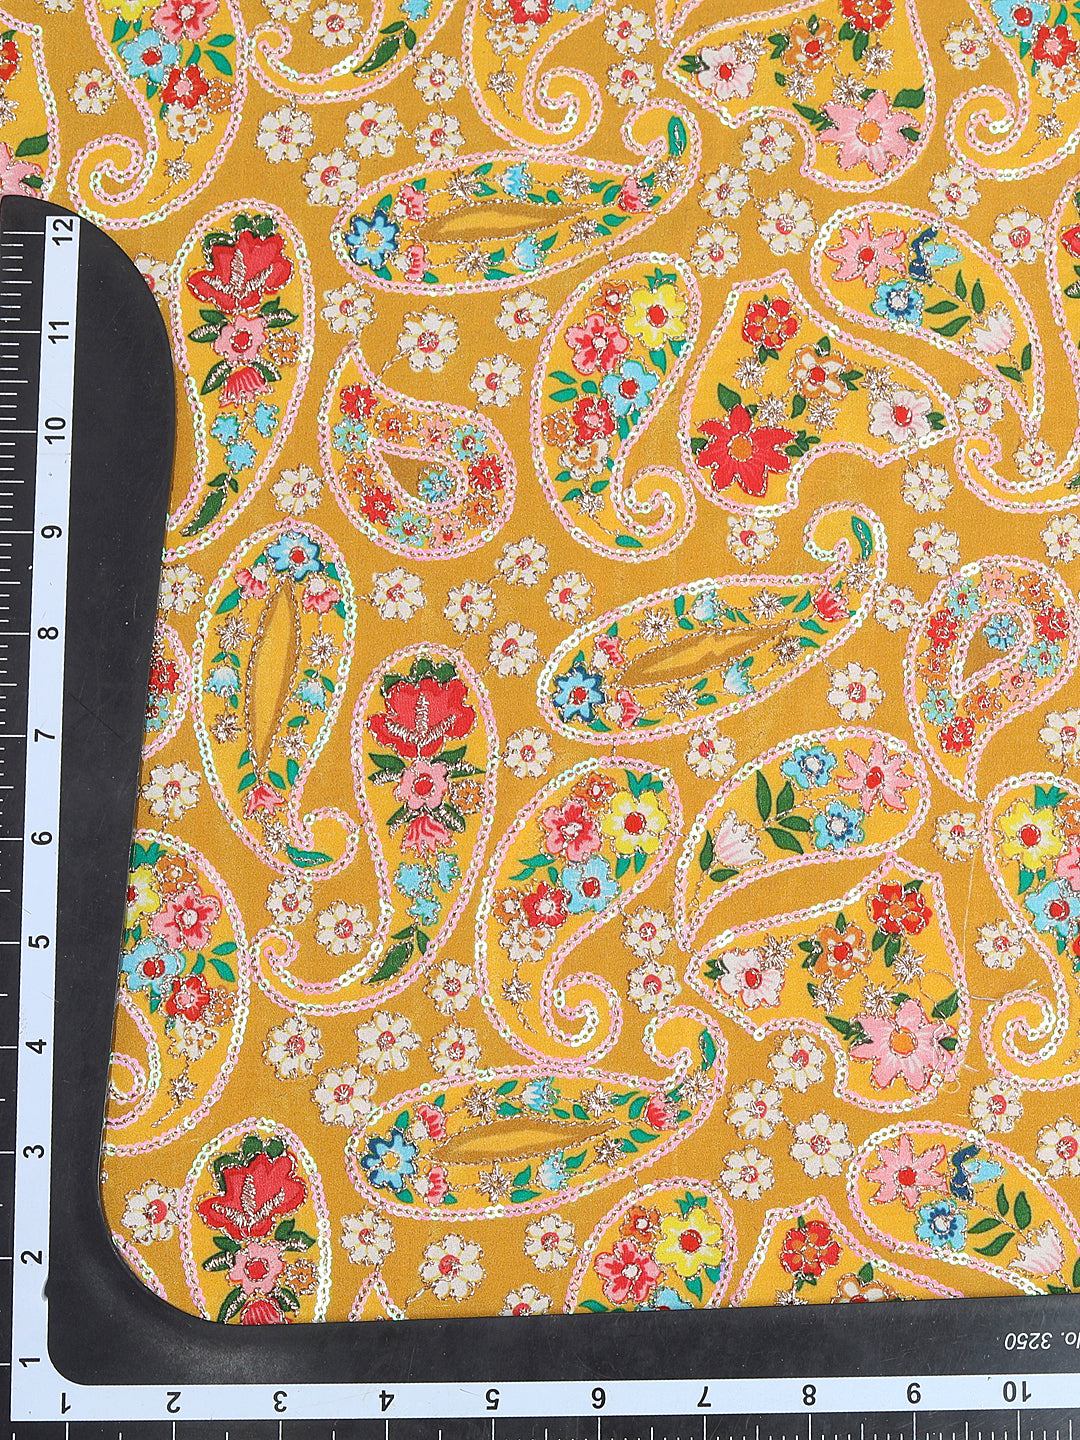 Gold Embroidered Paisley Pattern Yellow Crepe